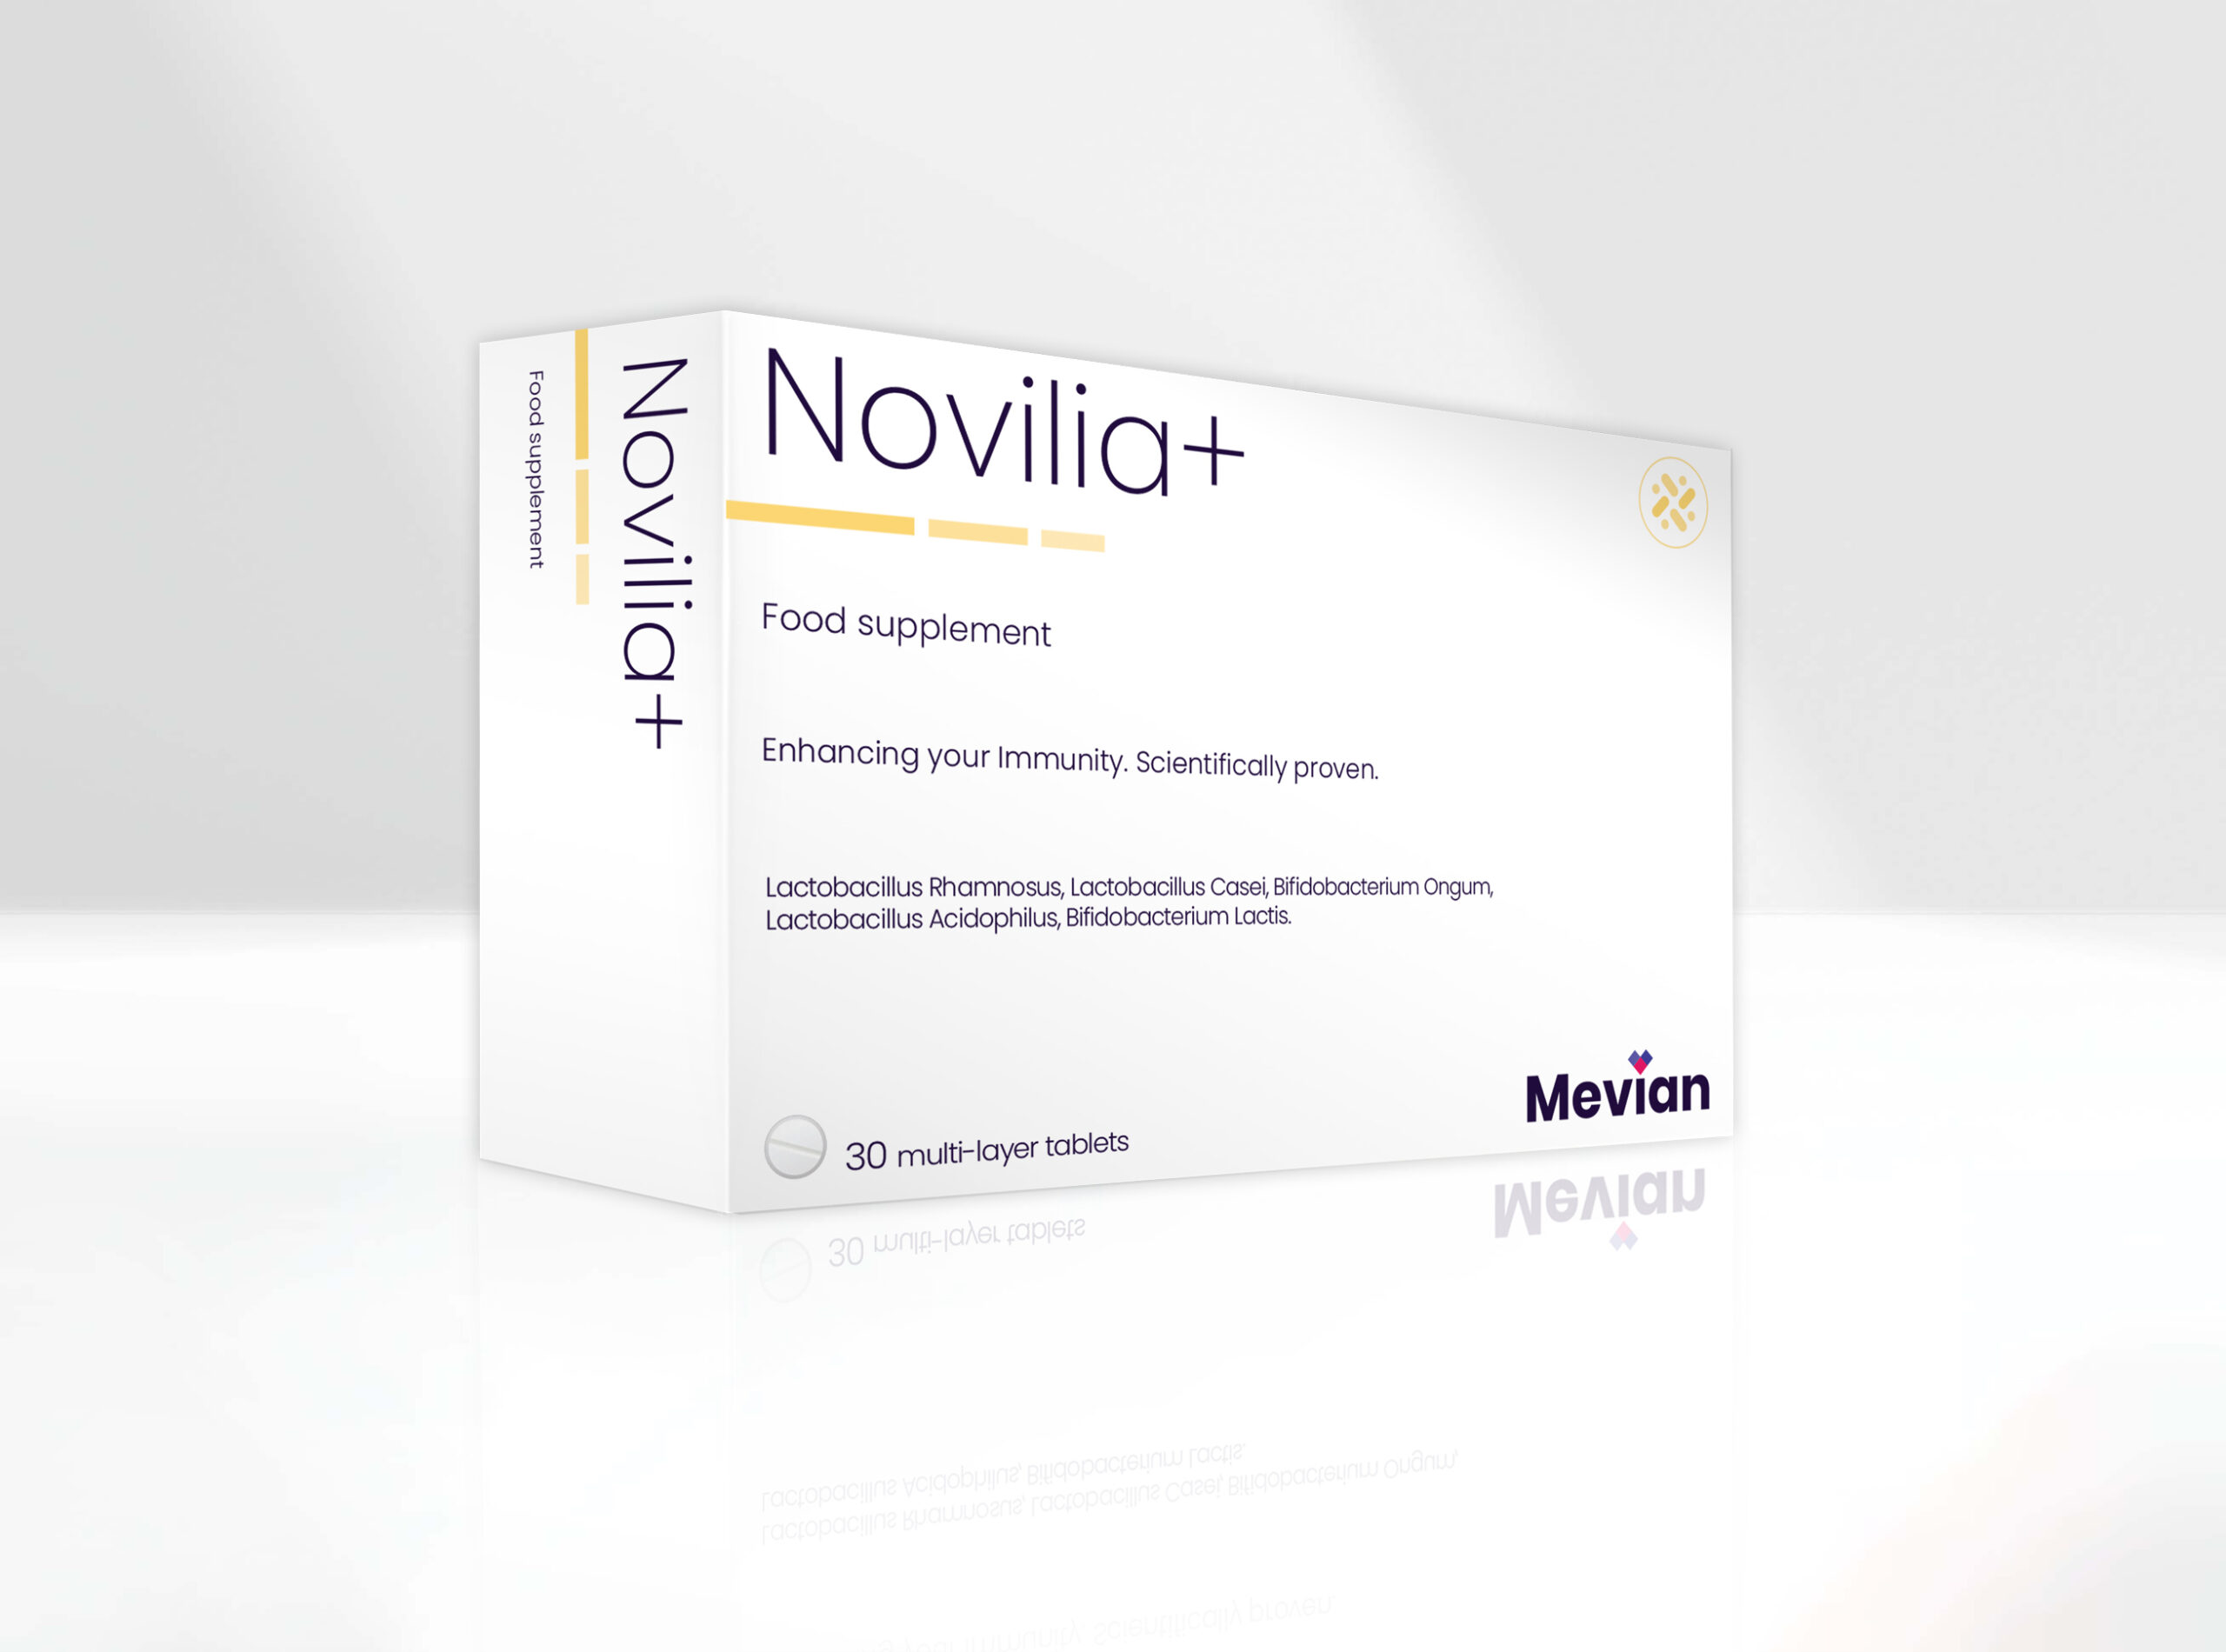 Novilia+ is a more potent version of probiotics for boosting immunity and providing soothing action of viral infection symptoms, suitable for adults and adolescents.